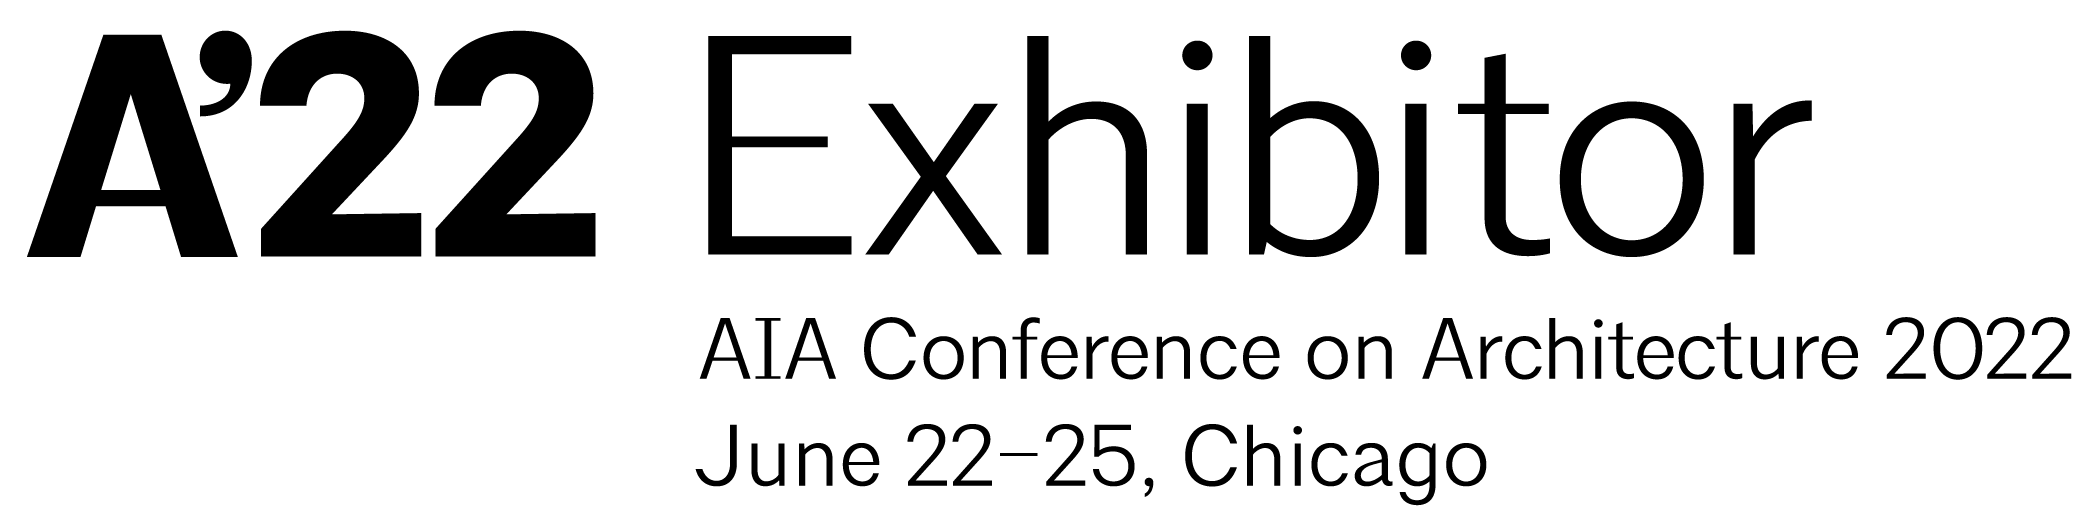 A'22 AIA Conference on Architecture 2022, June 22 - 25, Chicago